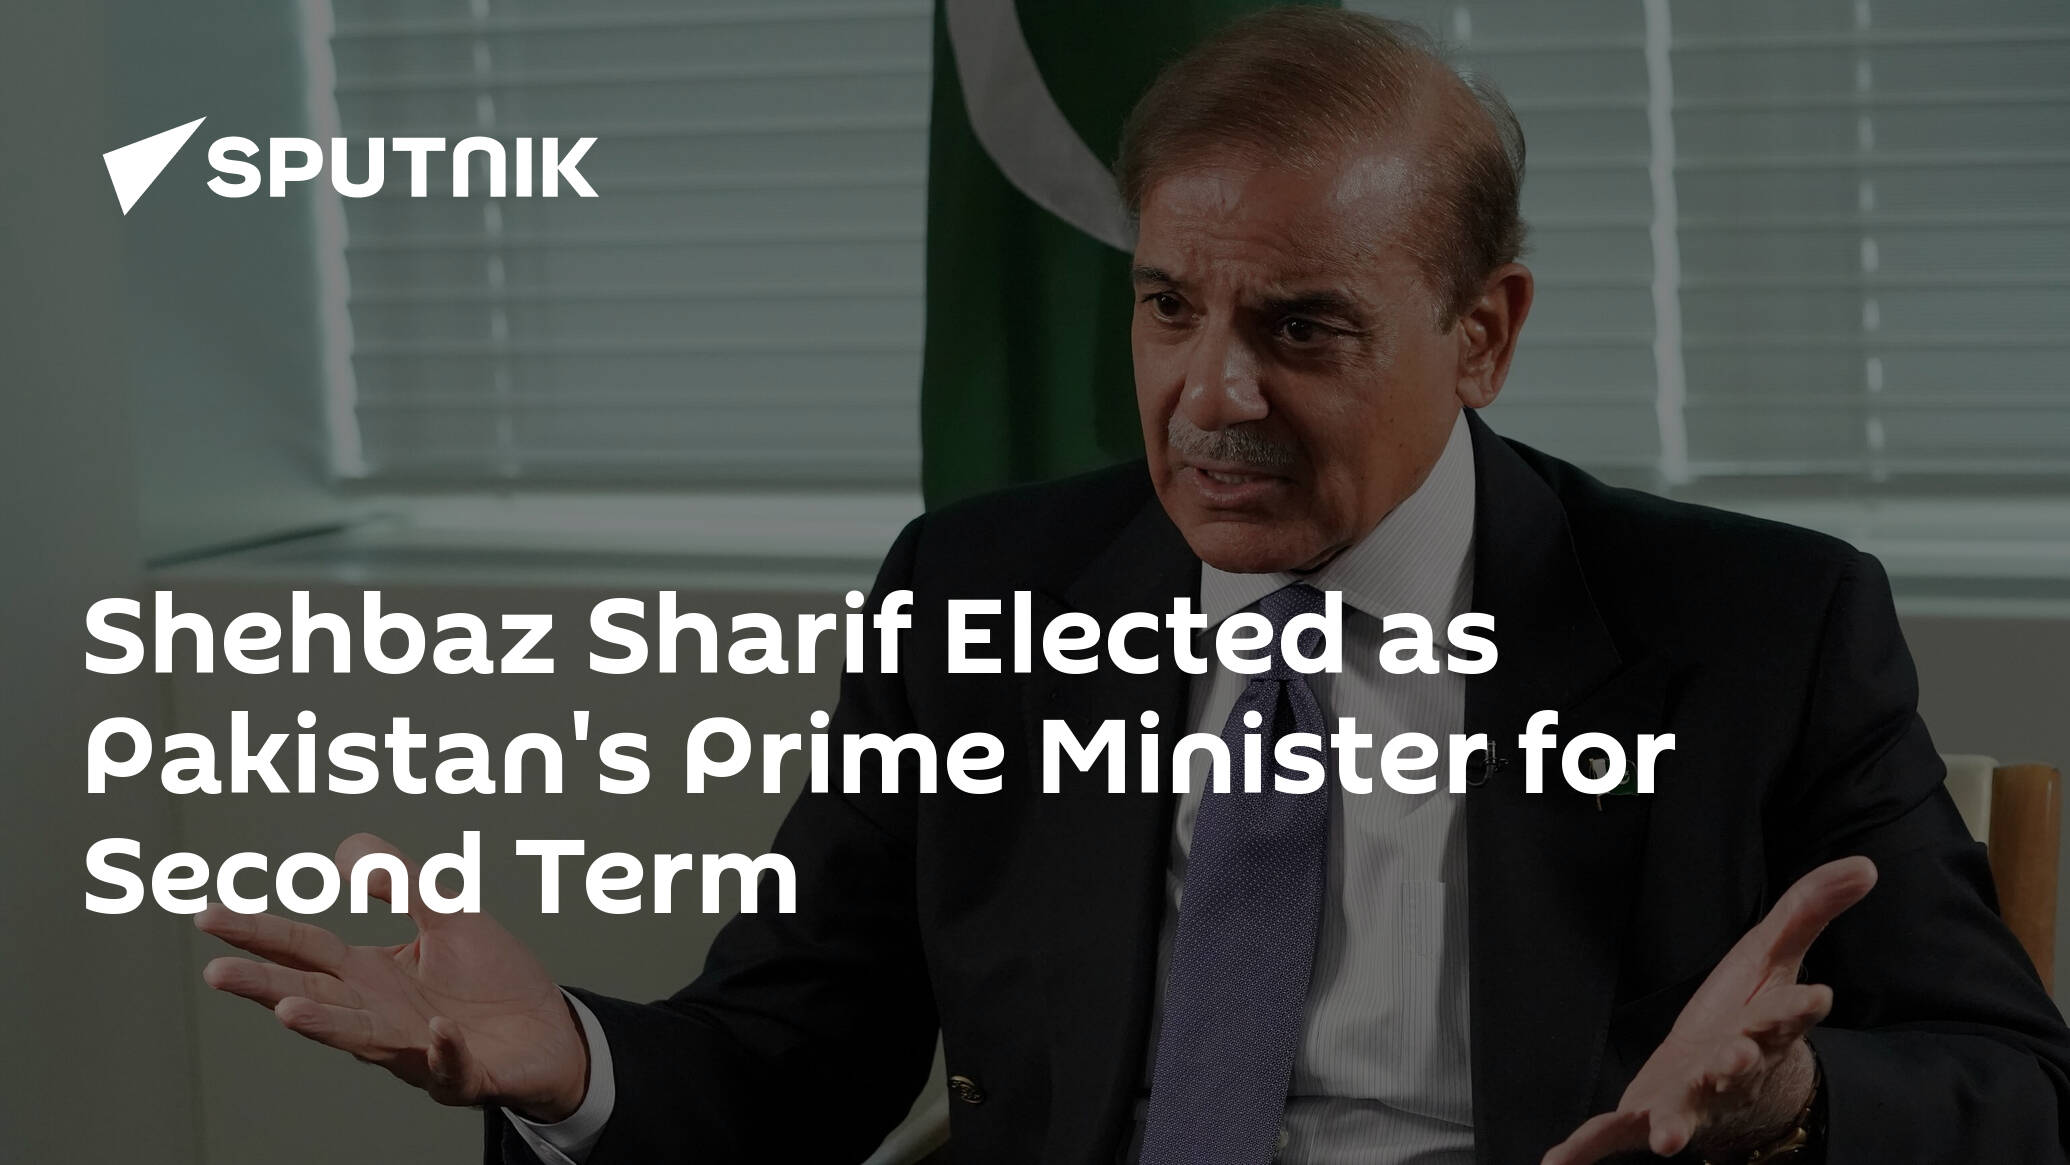 Shehbaz Sharif Elected as Pakistan's Prime Minister for Second Term